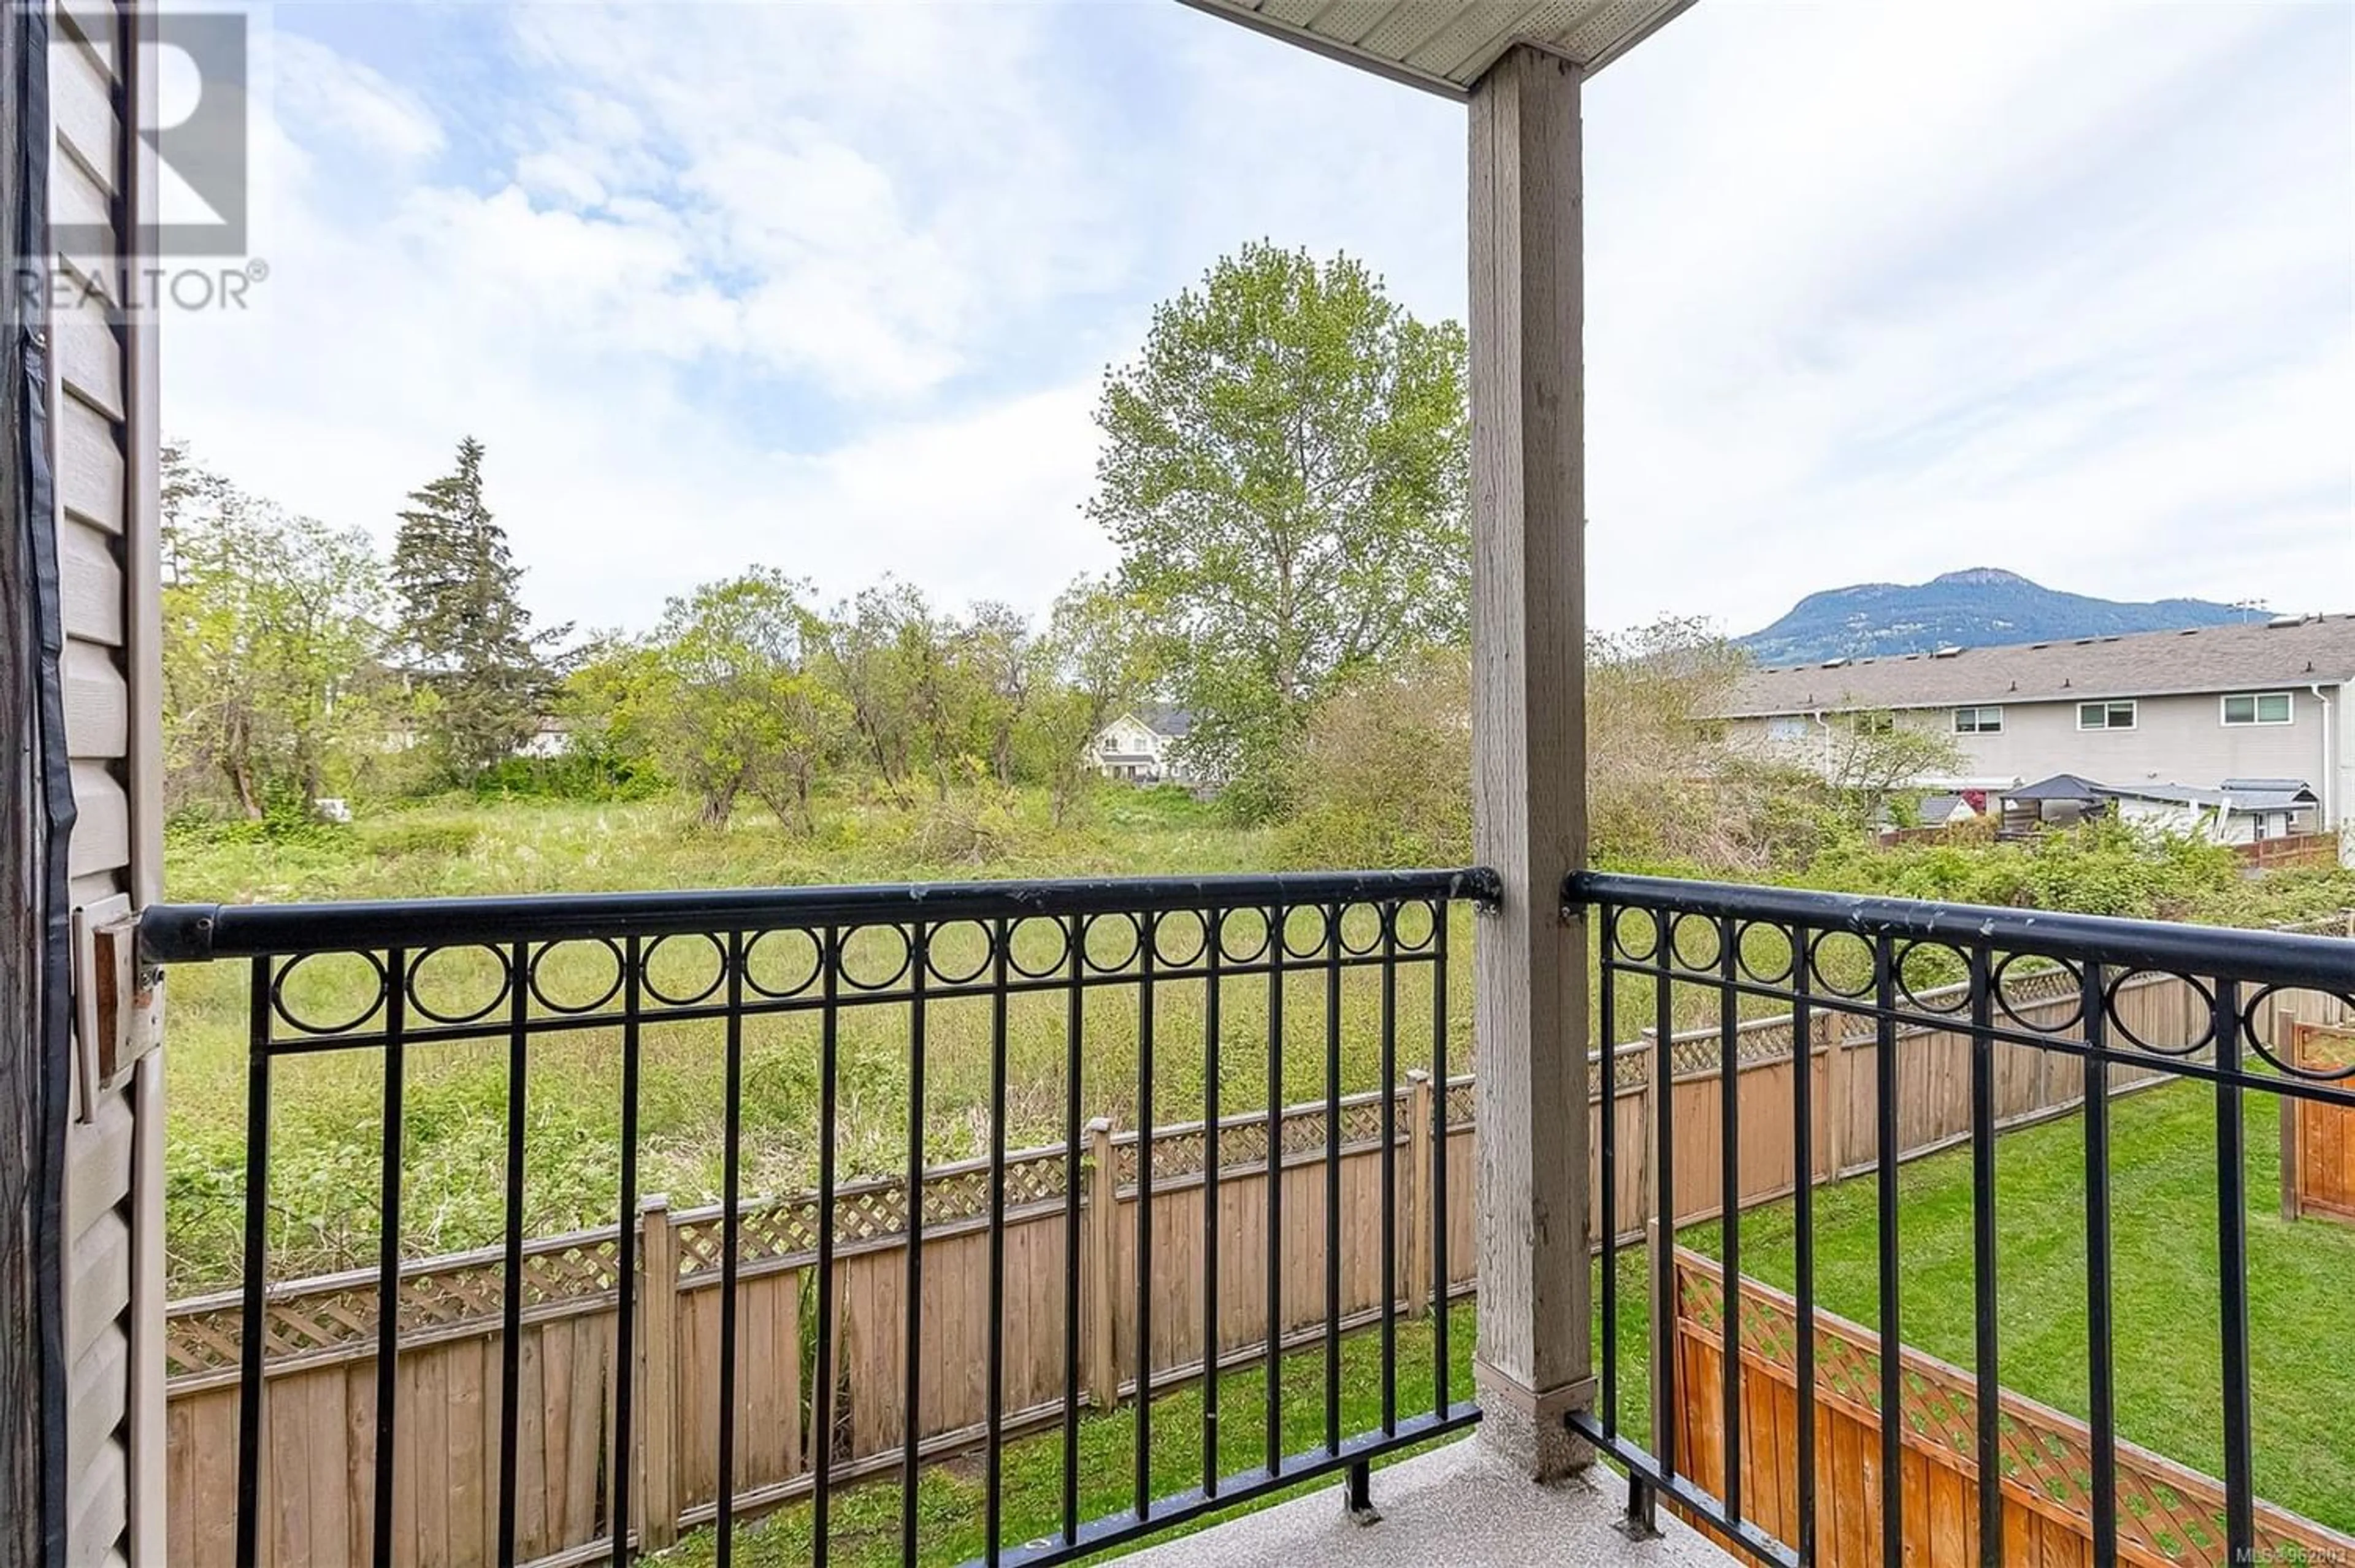 Balcony in the apartment for 224 3215 Cowichan Lake Rd, Duncan British Columbia V9L5G5